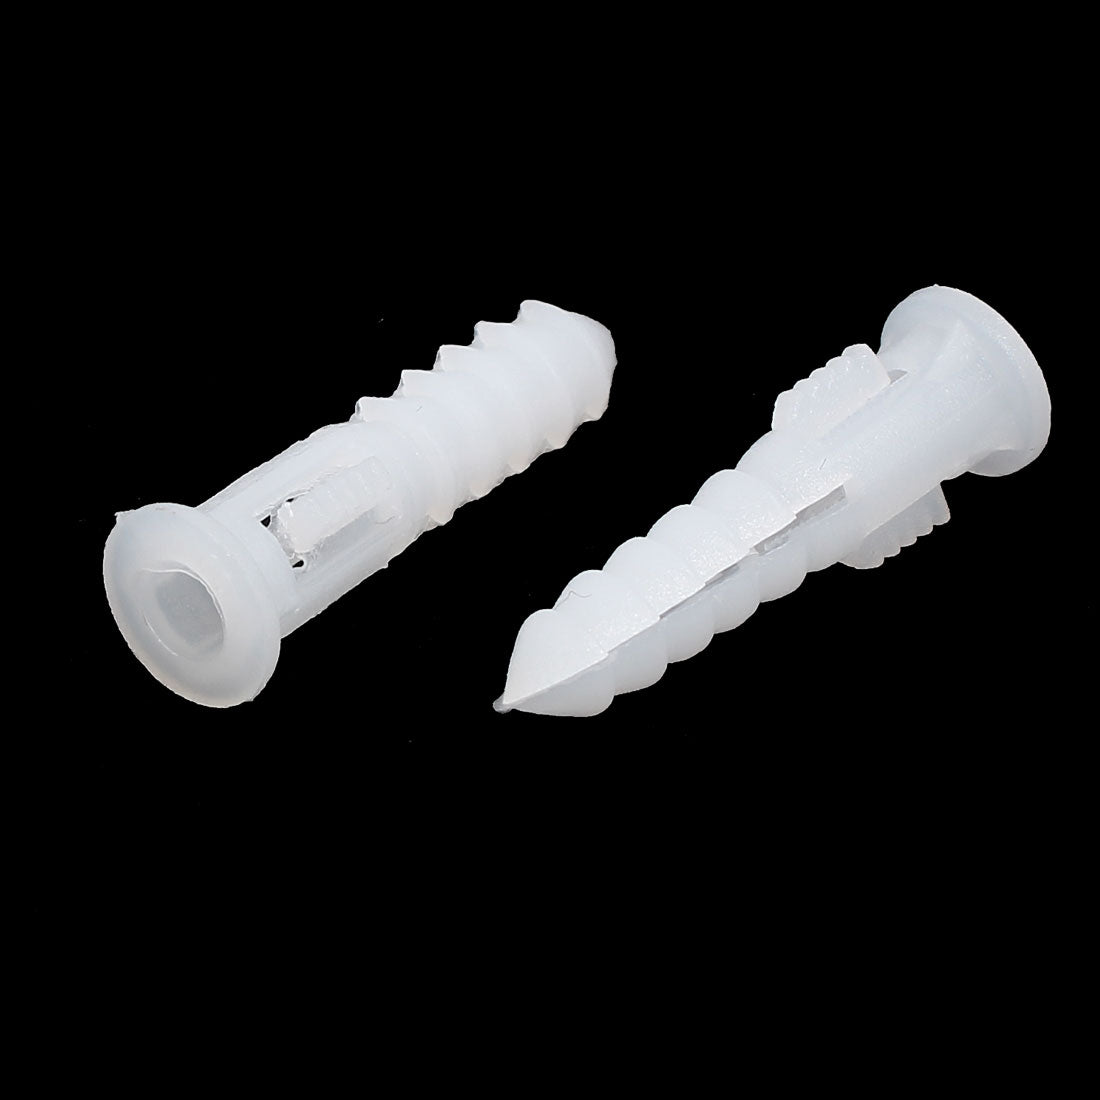 uxcell Uxcell 30mm Length Plastic Expansion Bolt Wall Drywall Anchor White 100pcs